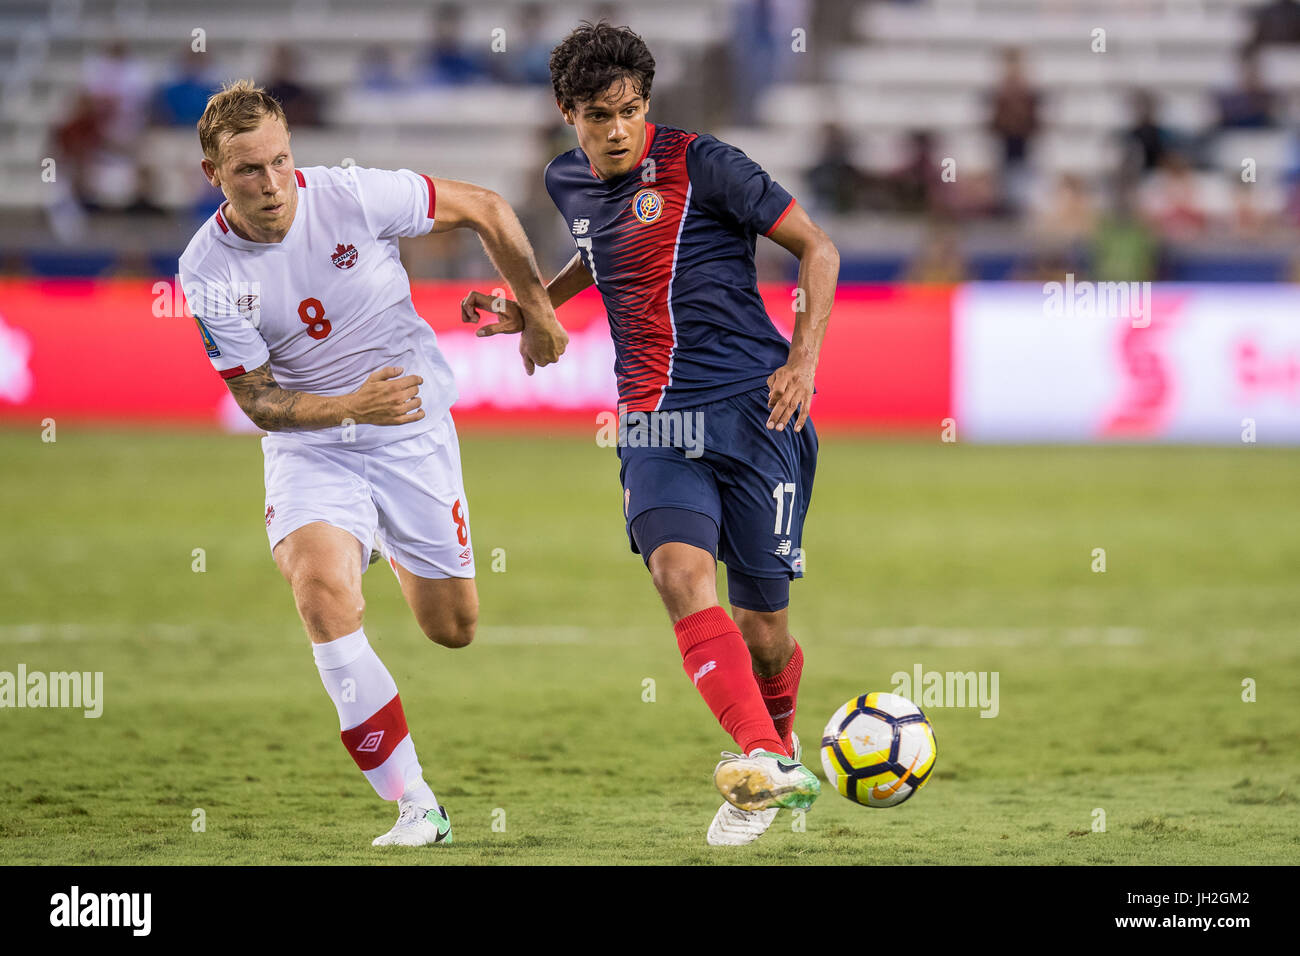 Houston, Texas, USA. 11th July, 2017. Costa Rica midfielder Yeltsin Tejeda (17) controls the ball in front of Canada midfielder Scott Arfield (8) during the 2nd half of an international CONCACAF Gold Cup soccer match between Canada and Costa Rica at BBVA Compass Stadium in Houston, TX on July 11th, 2017. The game ended in a 1-1 draw. Credit: Trask Smith/ZUMA Wire/Alamy Live News Stock Photo